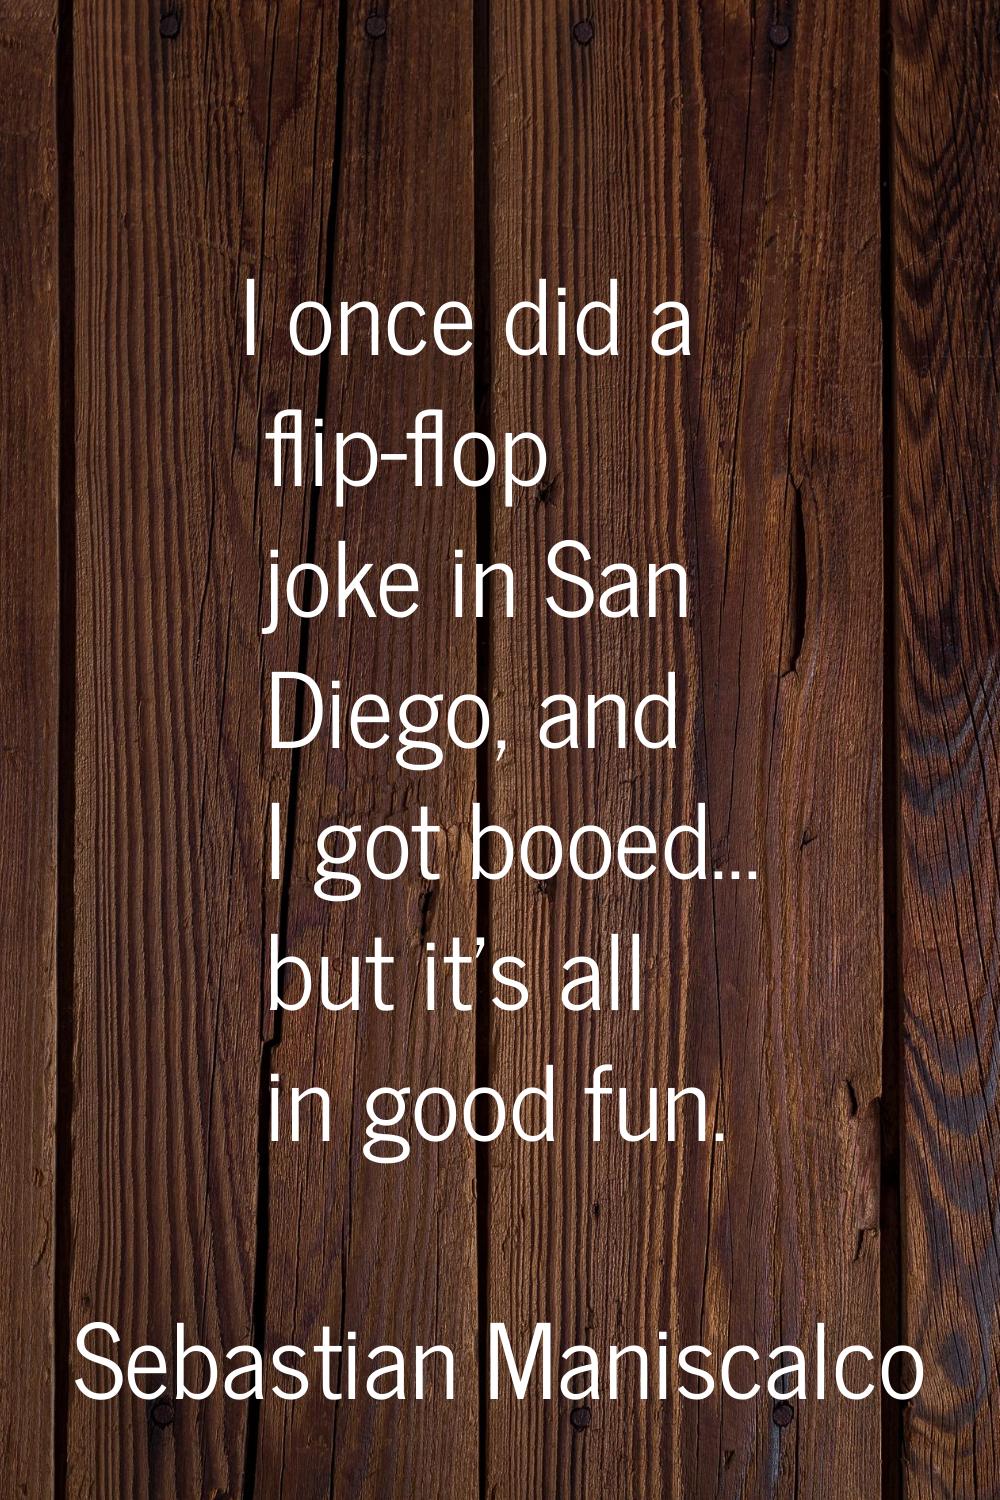 I once did a flip-flop joke in San Diego, and I got booed... but it's all in good fun.